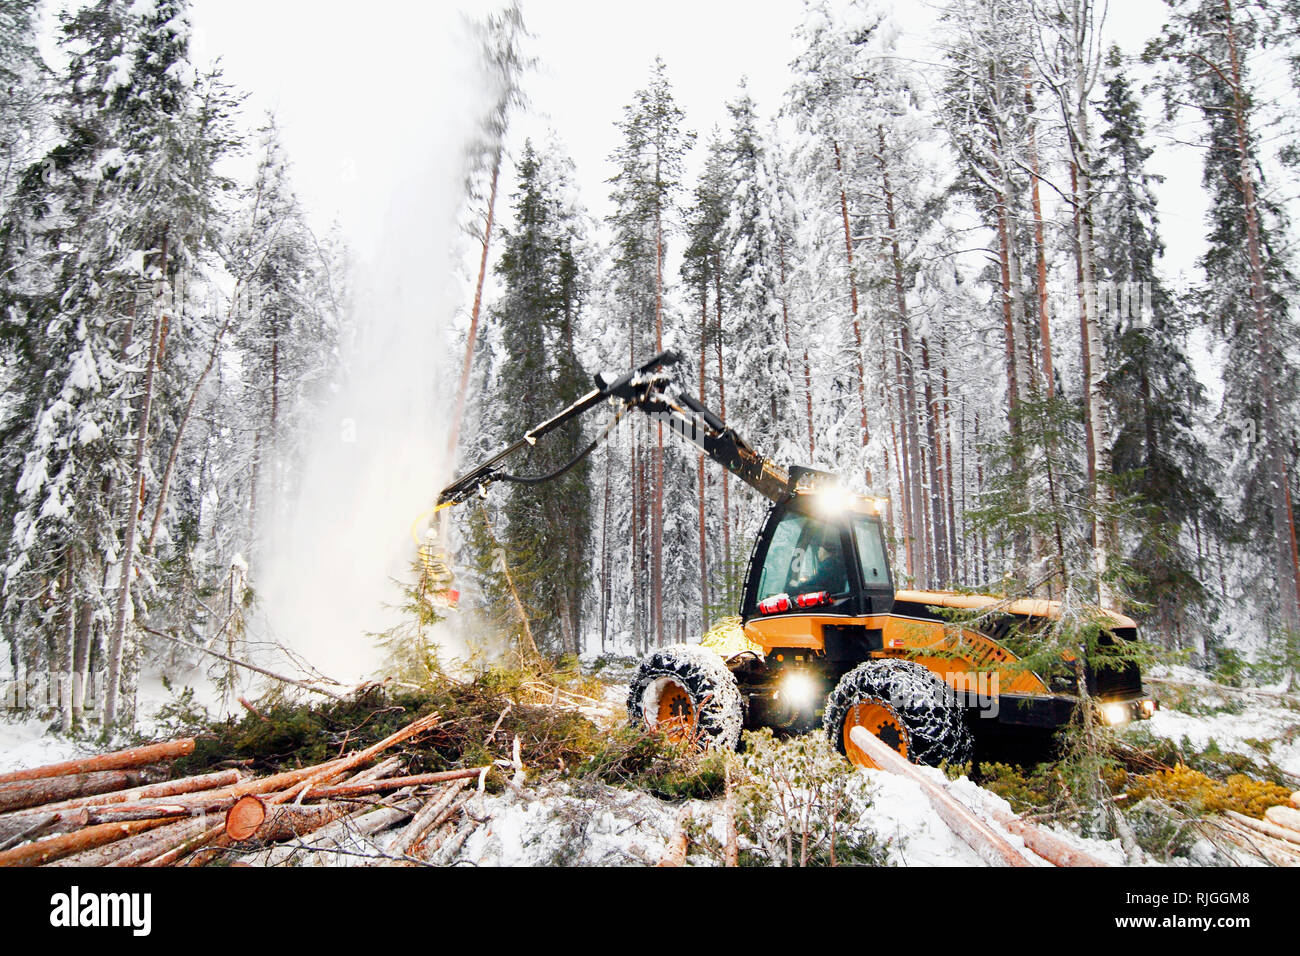 Logging vehicle carrying timber Stock Photo